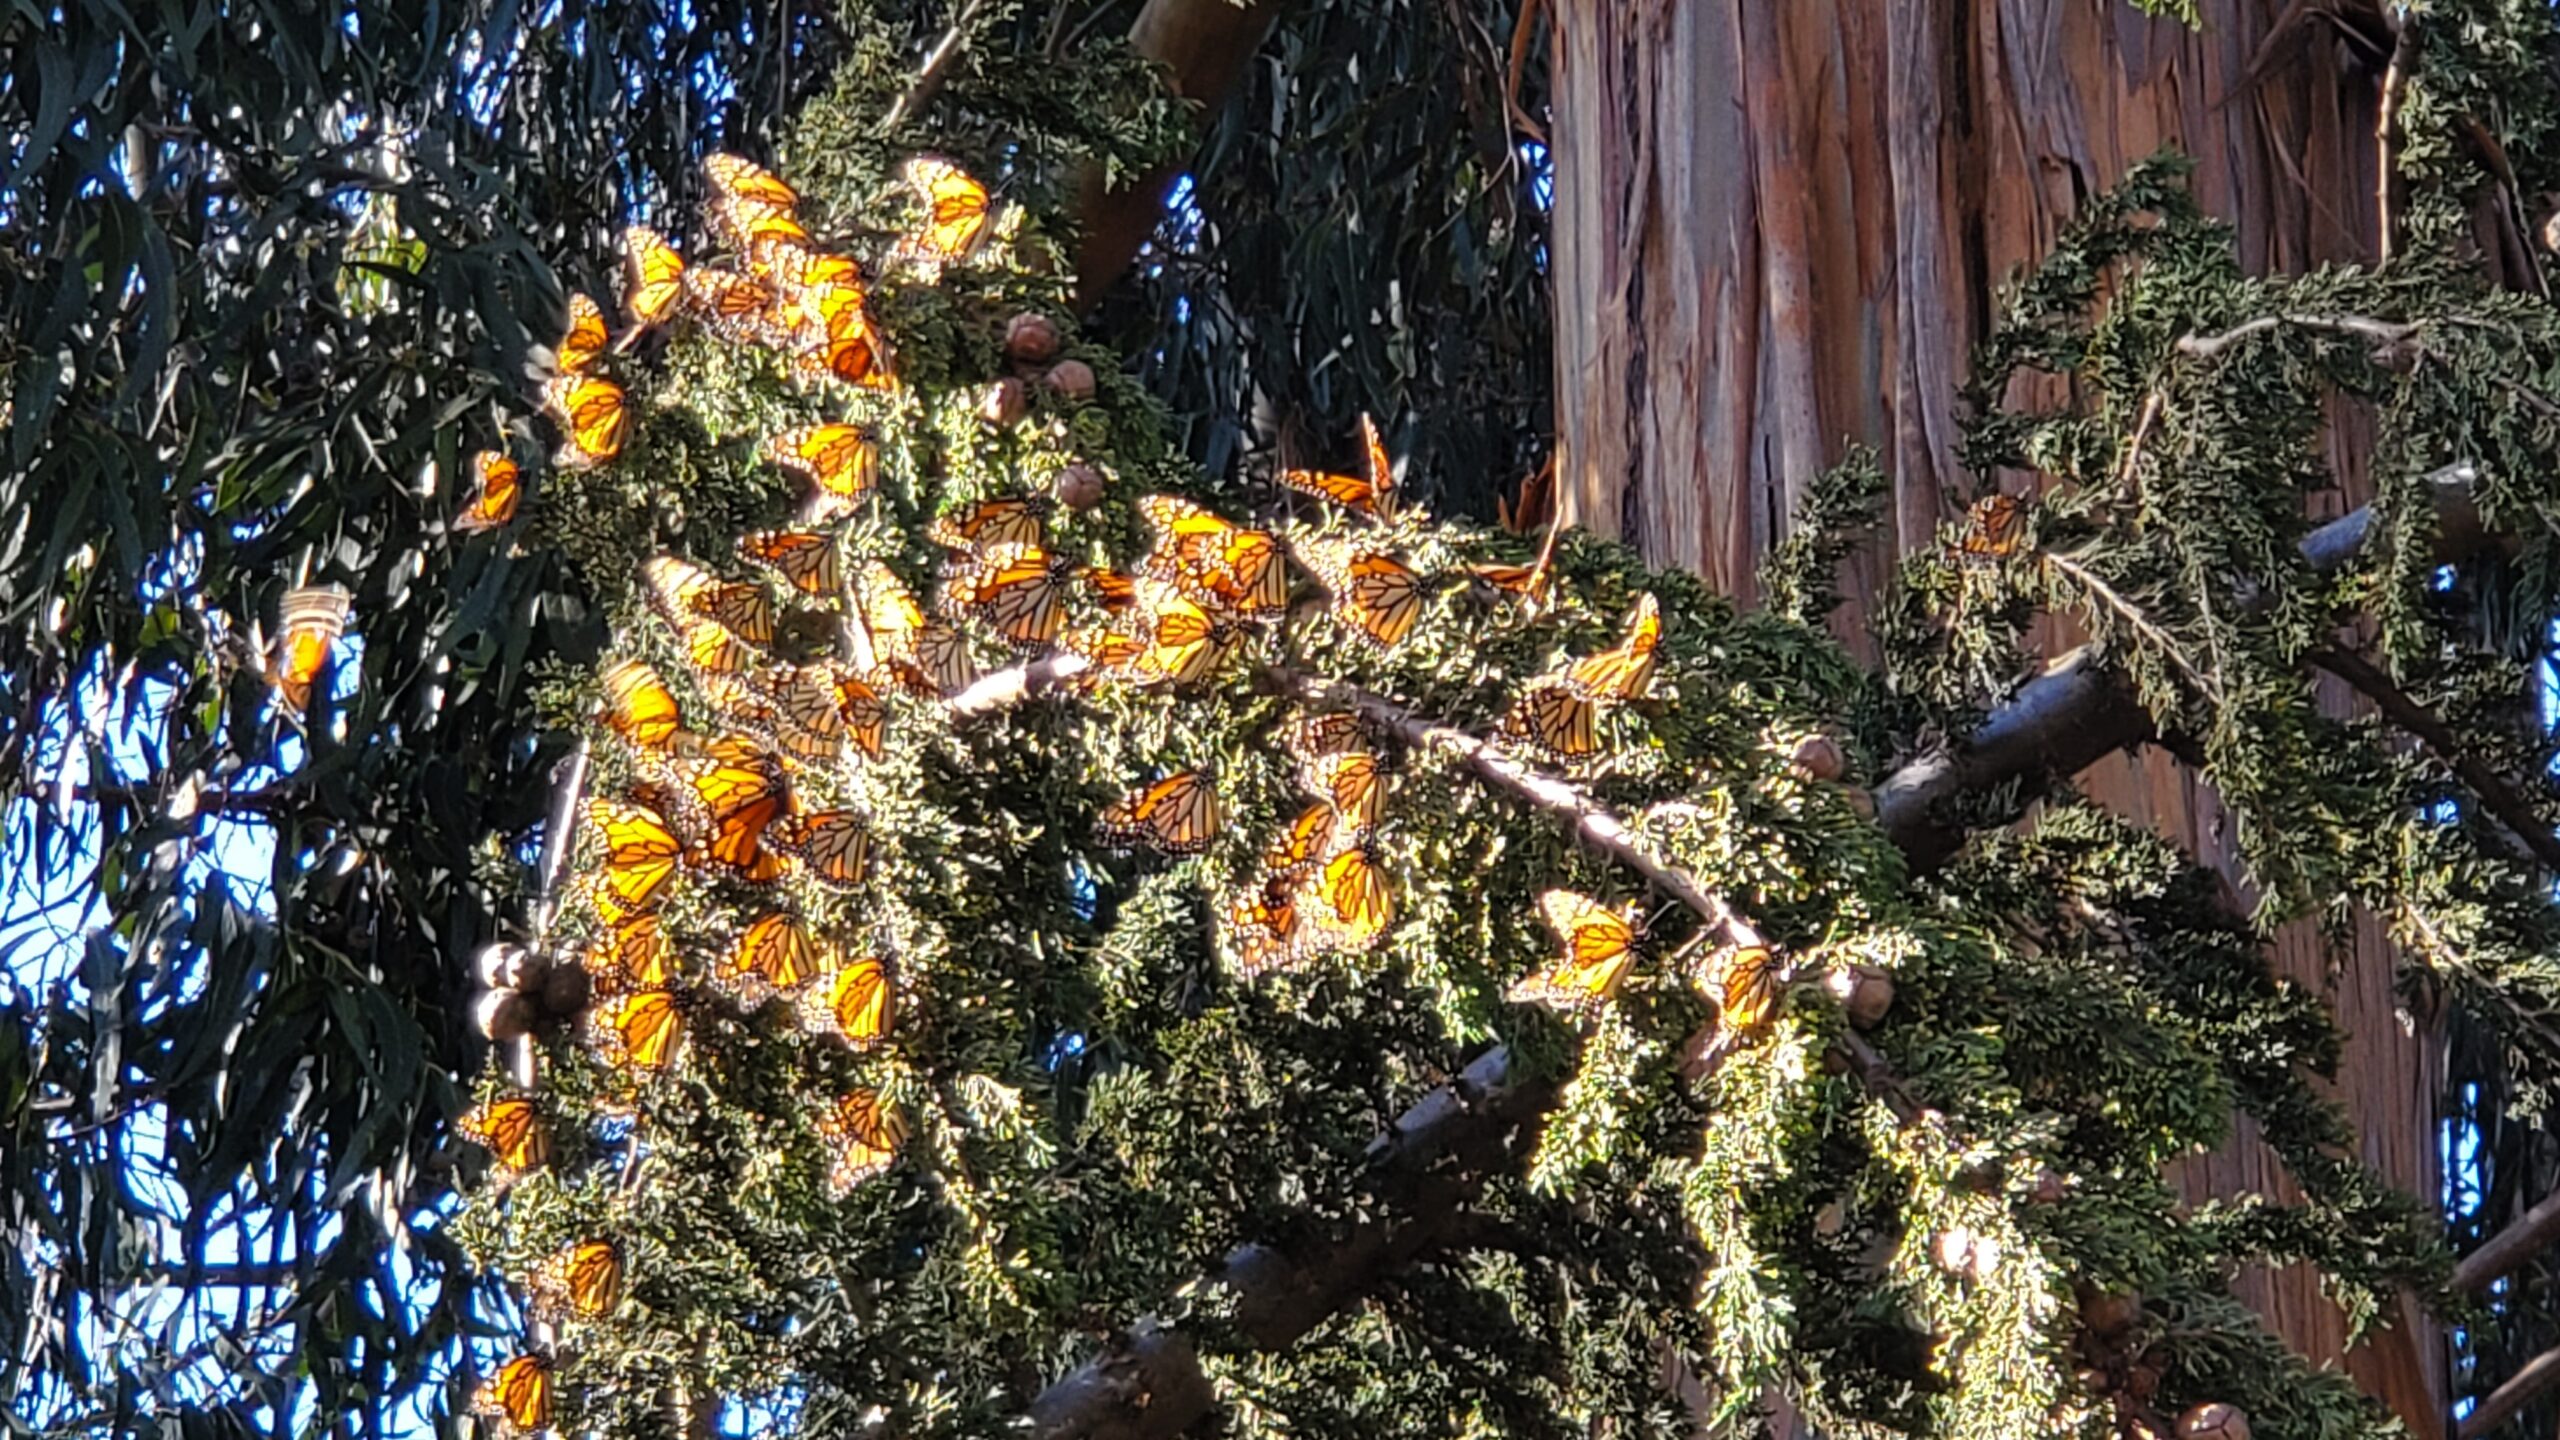 Dozens of butterflies warm themselves on a tree.